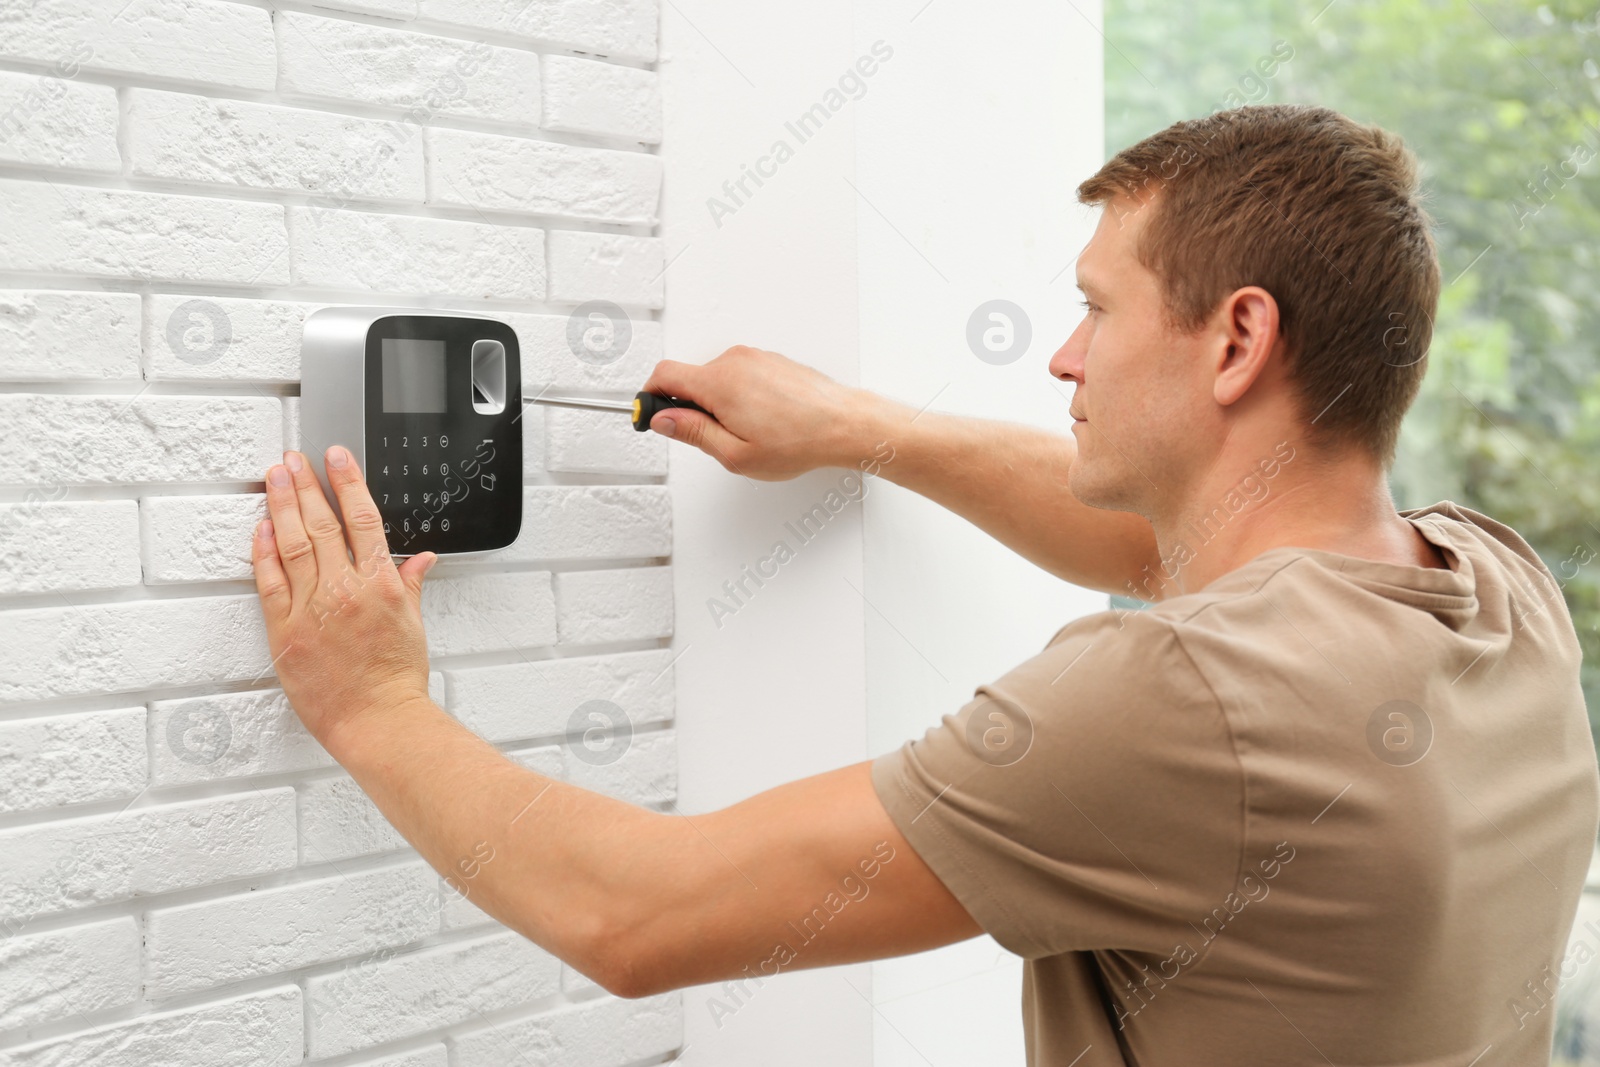 Photo of Male technician installing security alarm system indoors